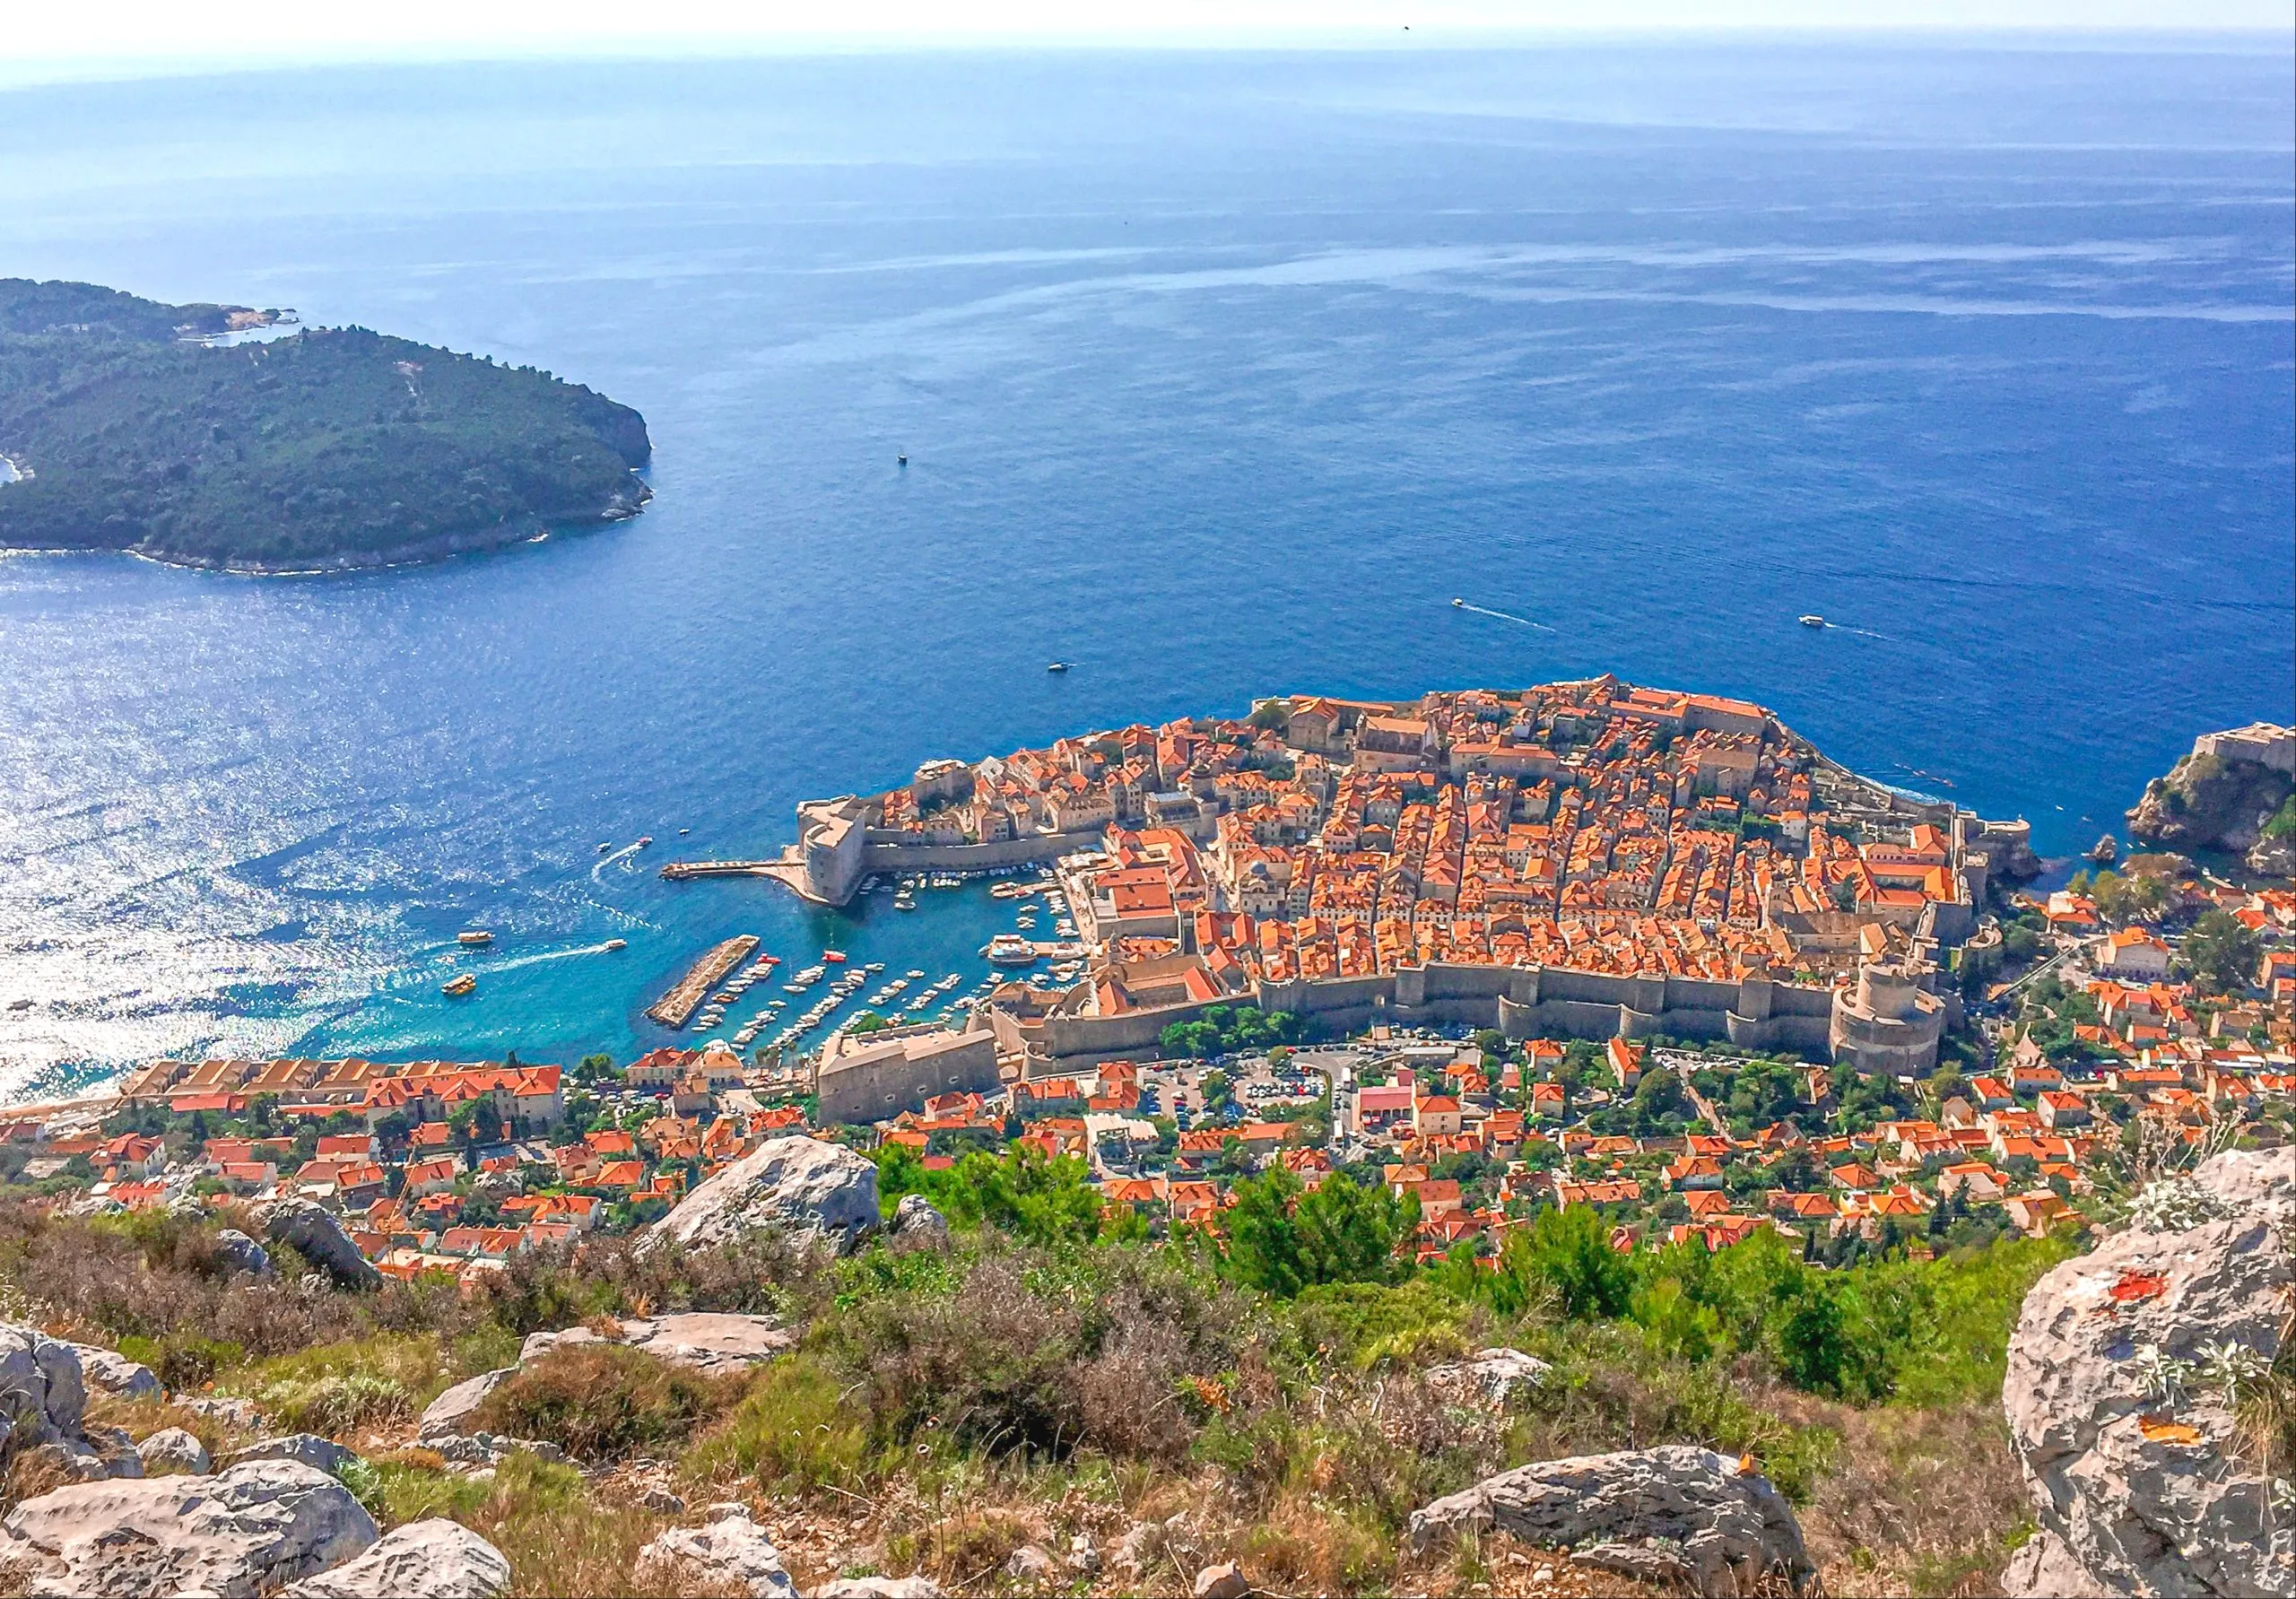 view of dubrovnik from far above on mount srd, one of the best places to visit in croatia